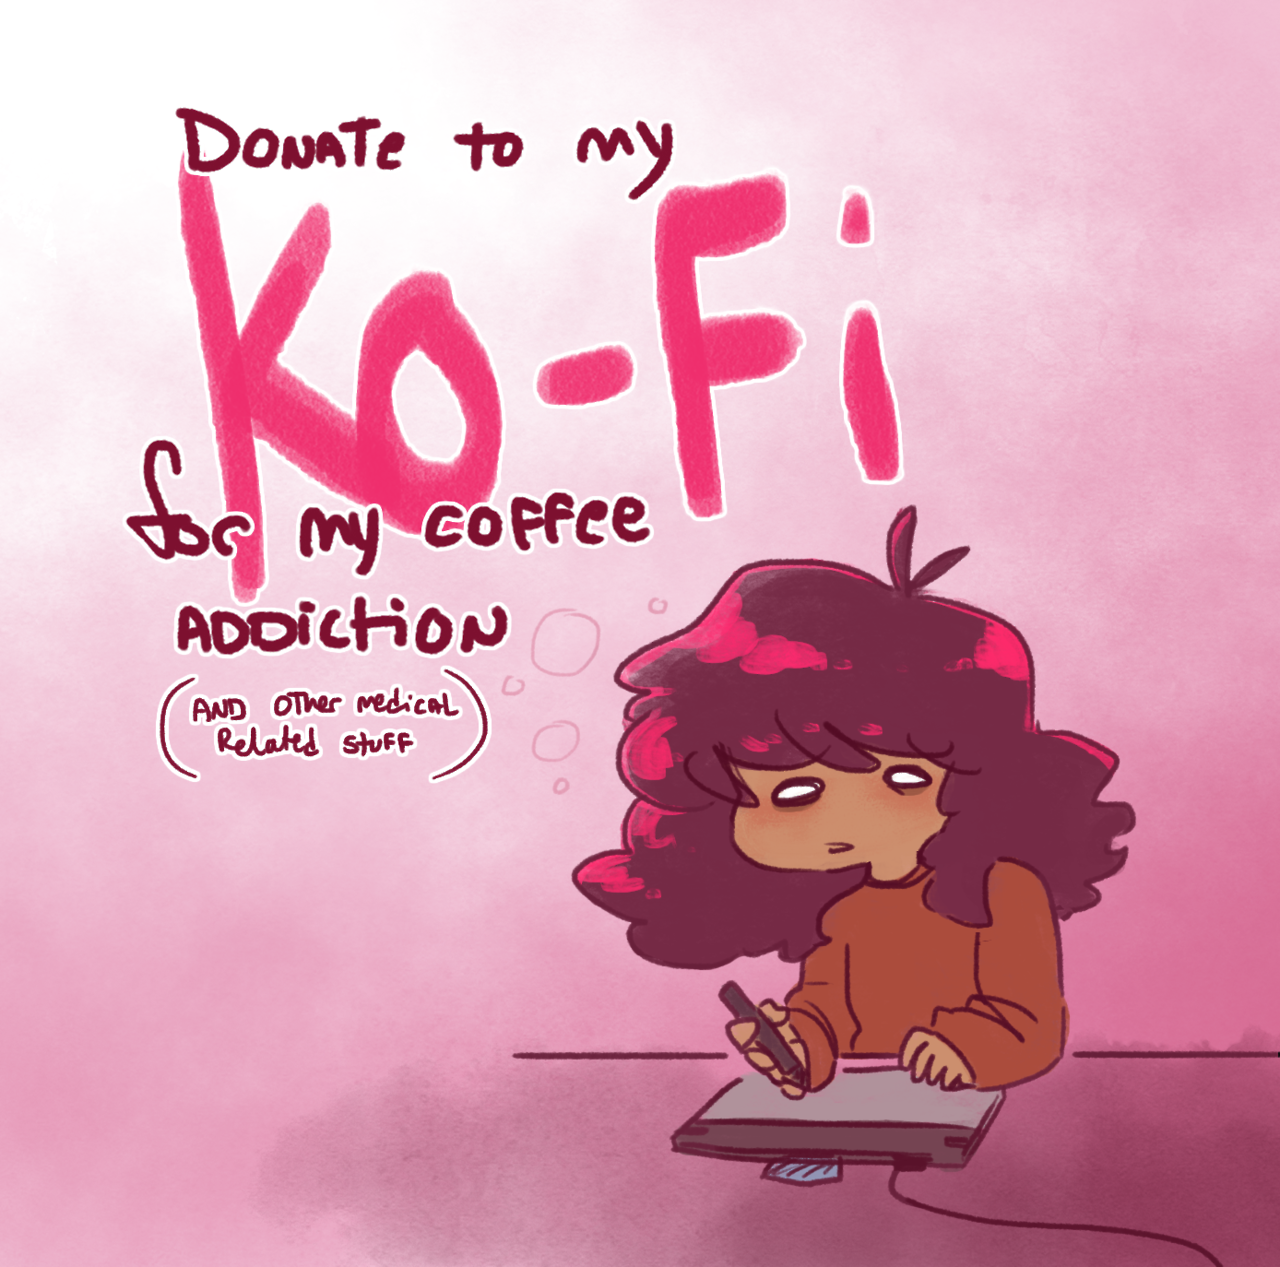 mcsiggy: &gt;&gt; My Ko-Fi &lt;&lt; An easy way for peeps who can’t